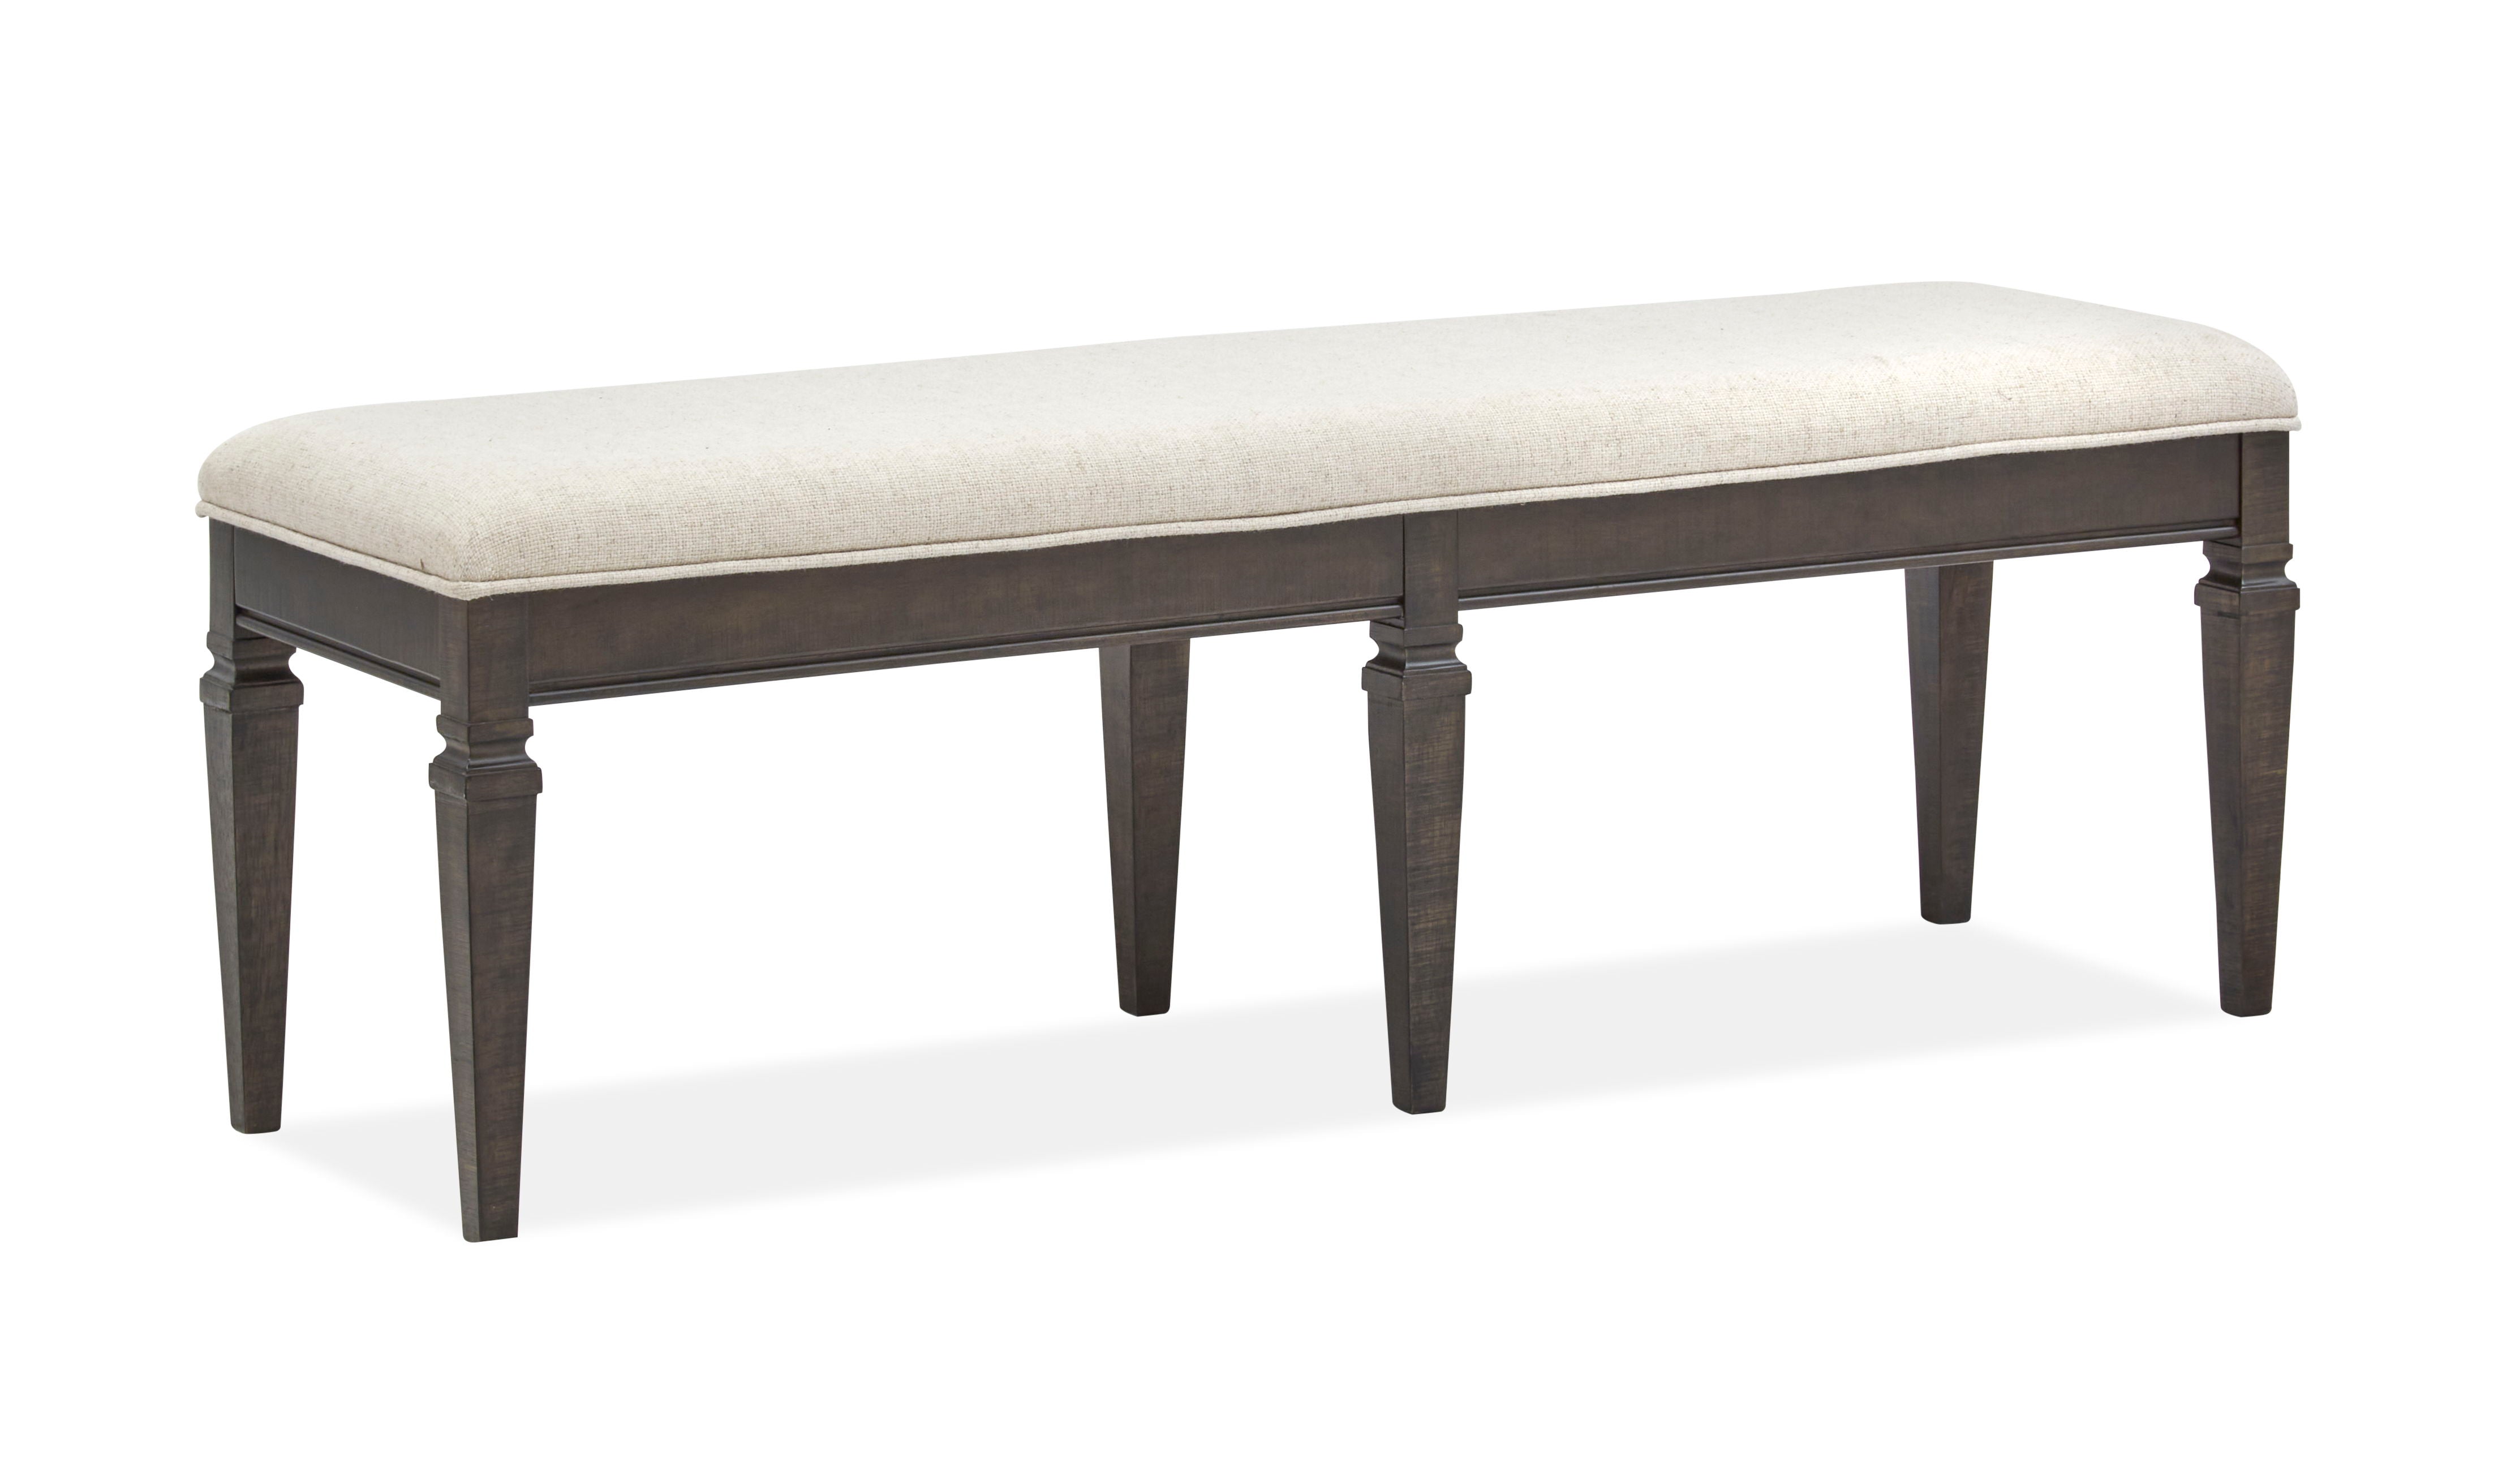 Calistoga - Bench With Upholstered Seat - Weathered Charcoal